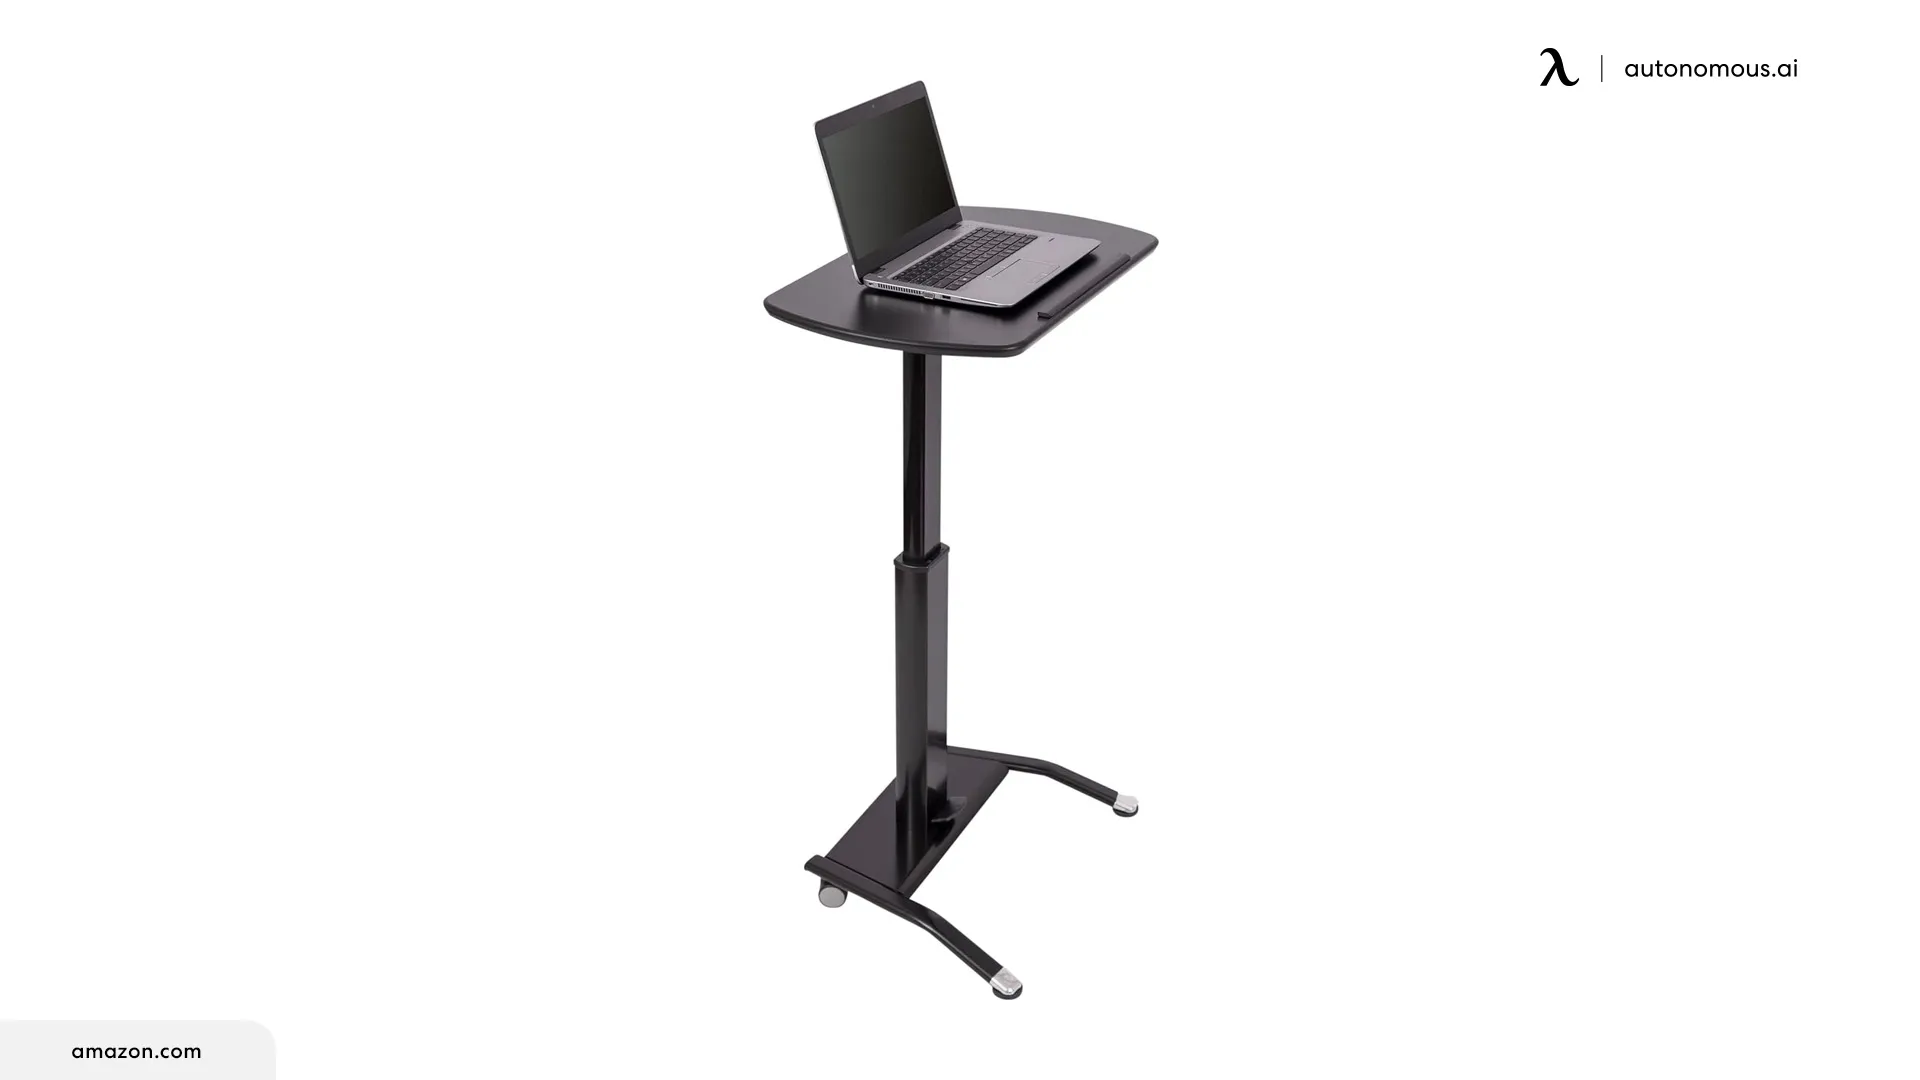 Stand-Up Desk Store Pneumatic Adjustable Tray